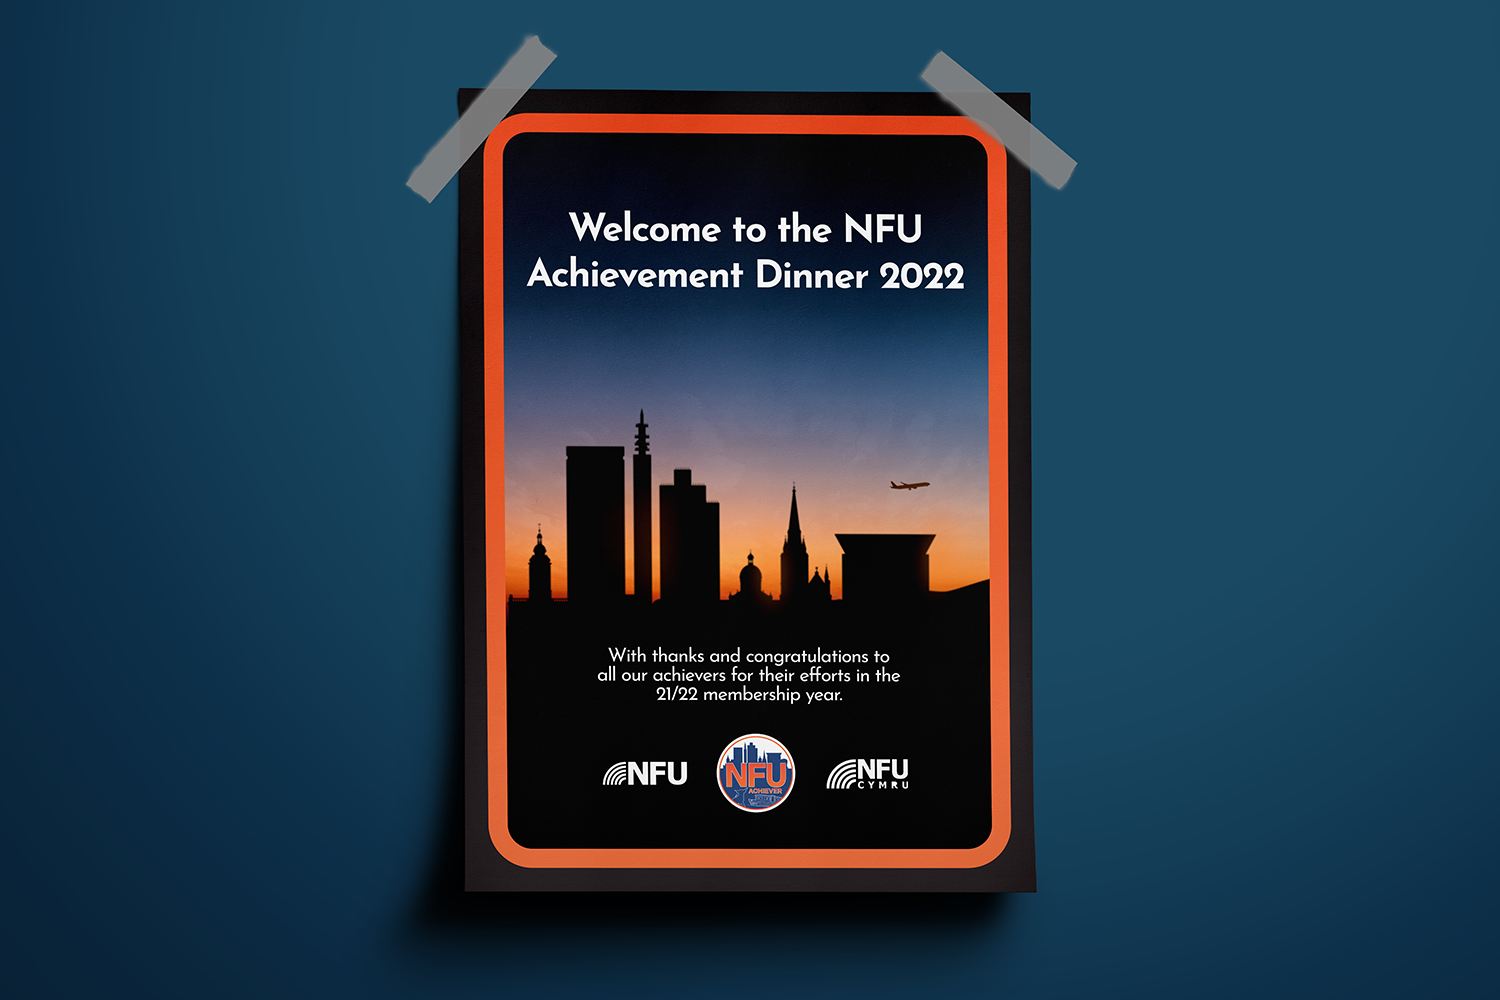 NFU's Grand Gathering: A New York City Experience Crafted by Rebel Lion Advertising